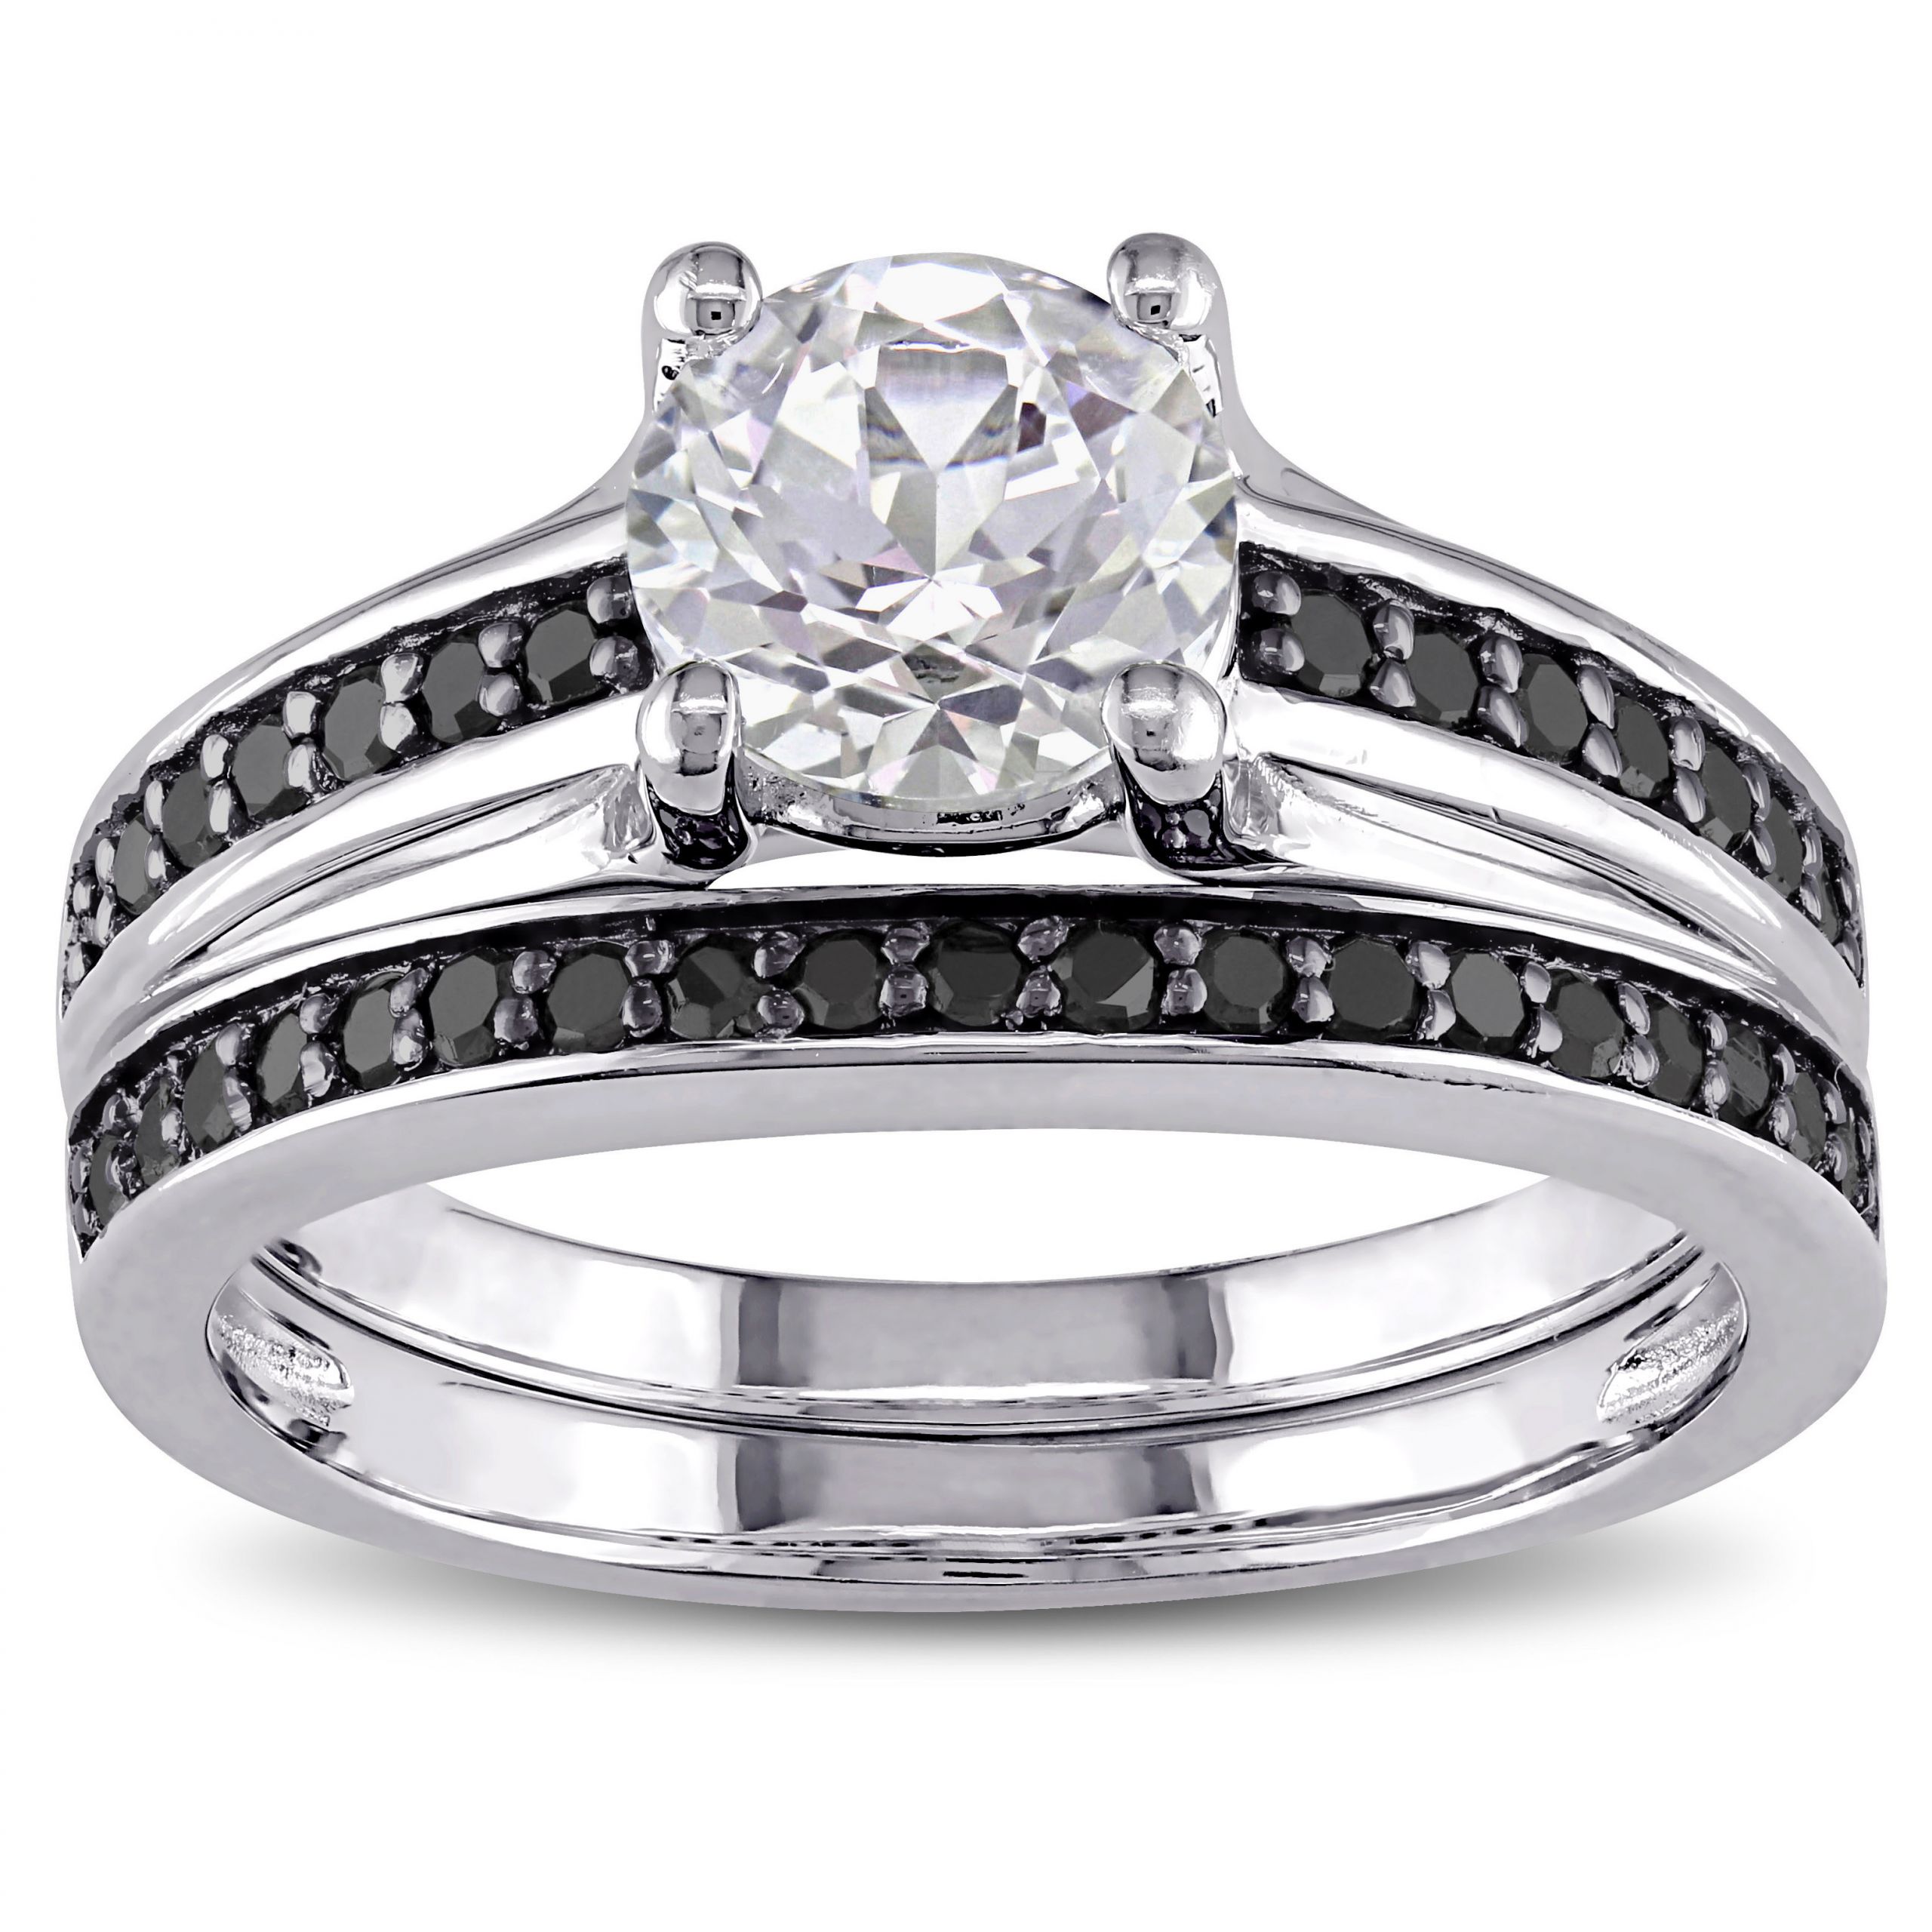 White Sapphire Wedding Ring Sets
 Sterling Silver White Sapphire and 1 3 Ct TDW Black